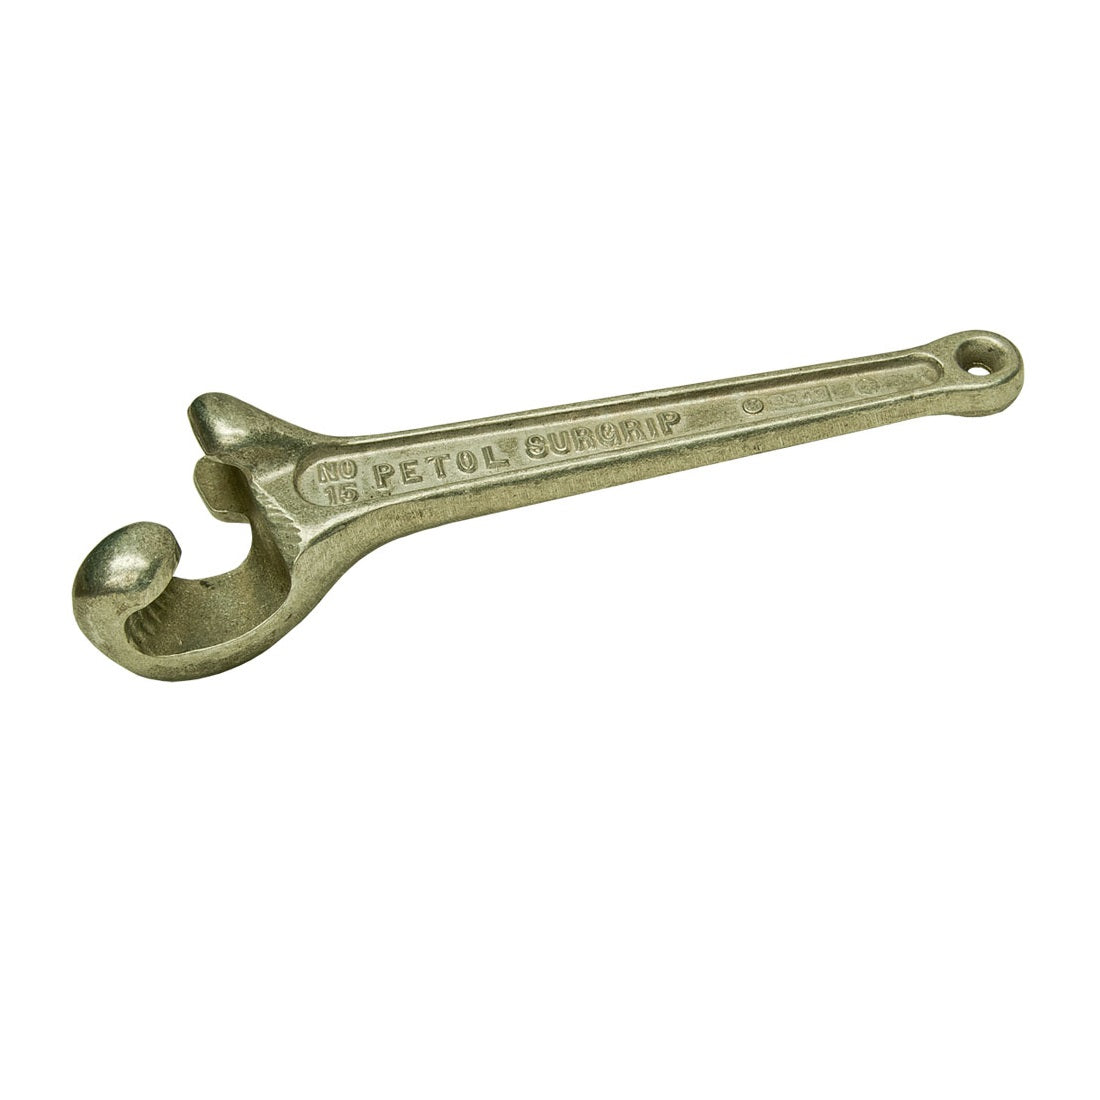 Gearench El-mac surgrip valve wheel wrenches tools